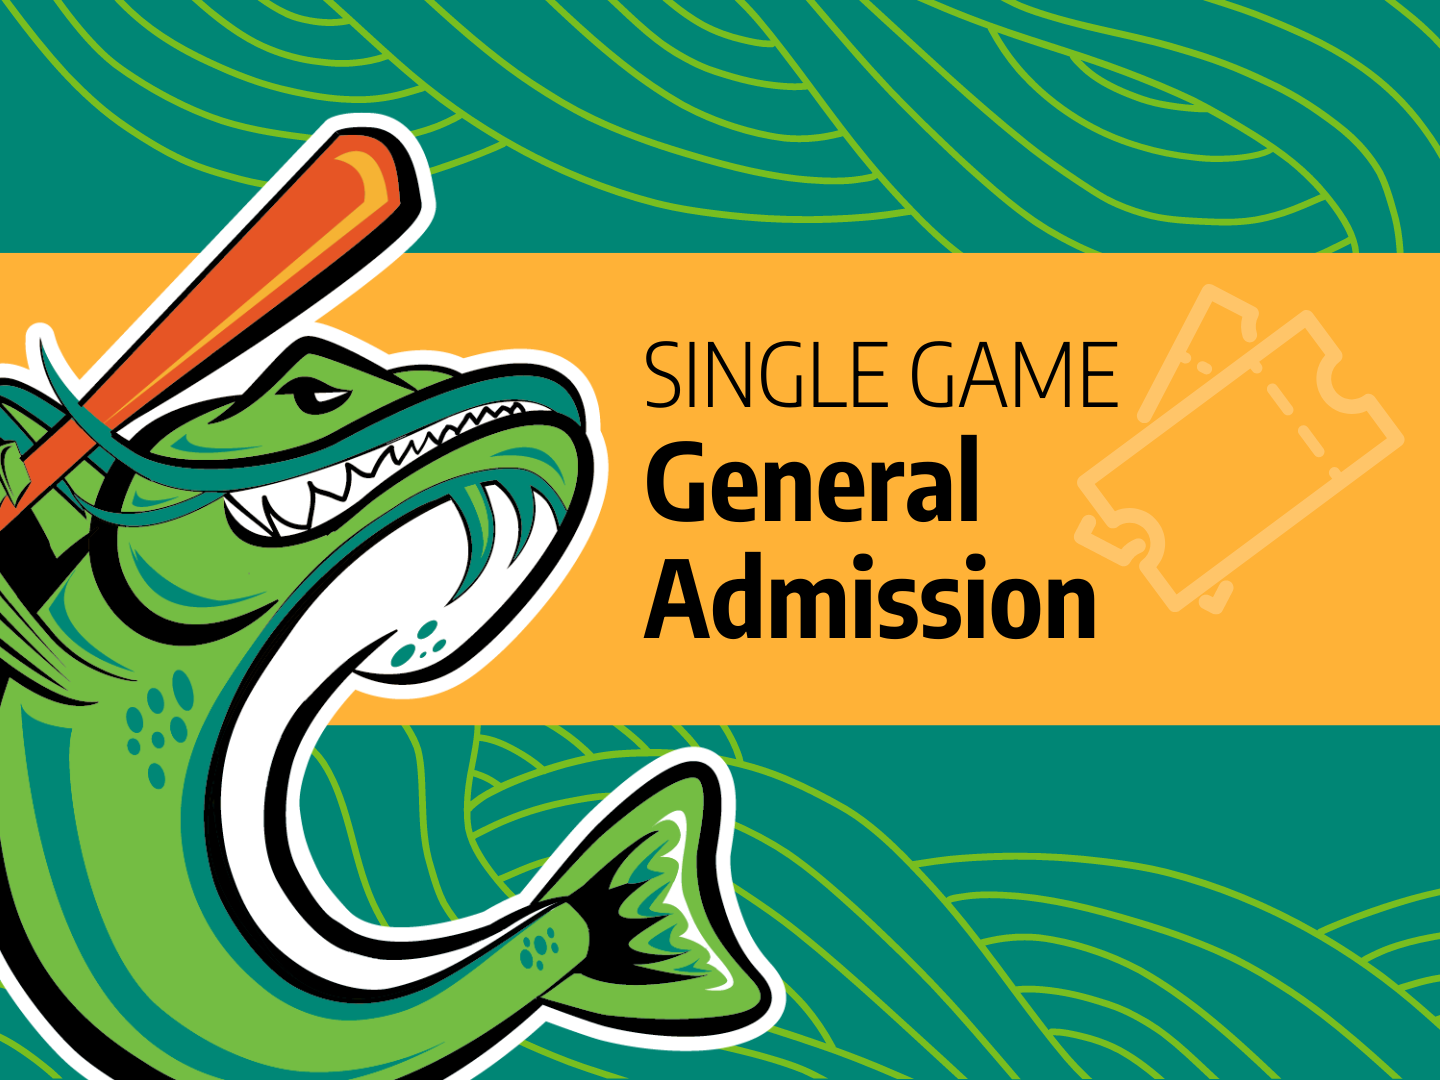 Single Game General Admission